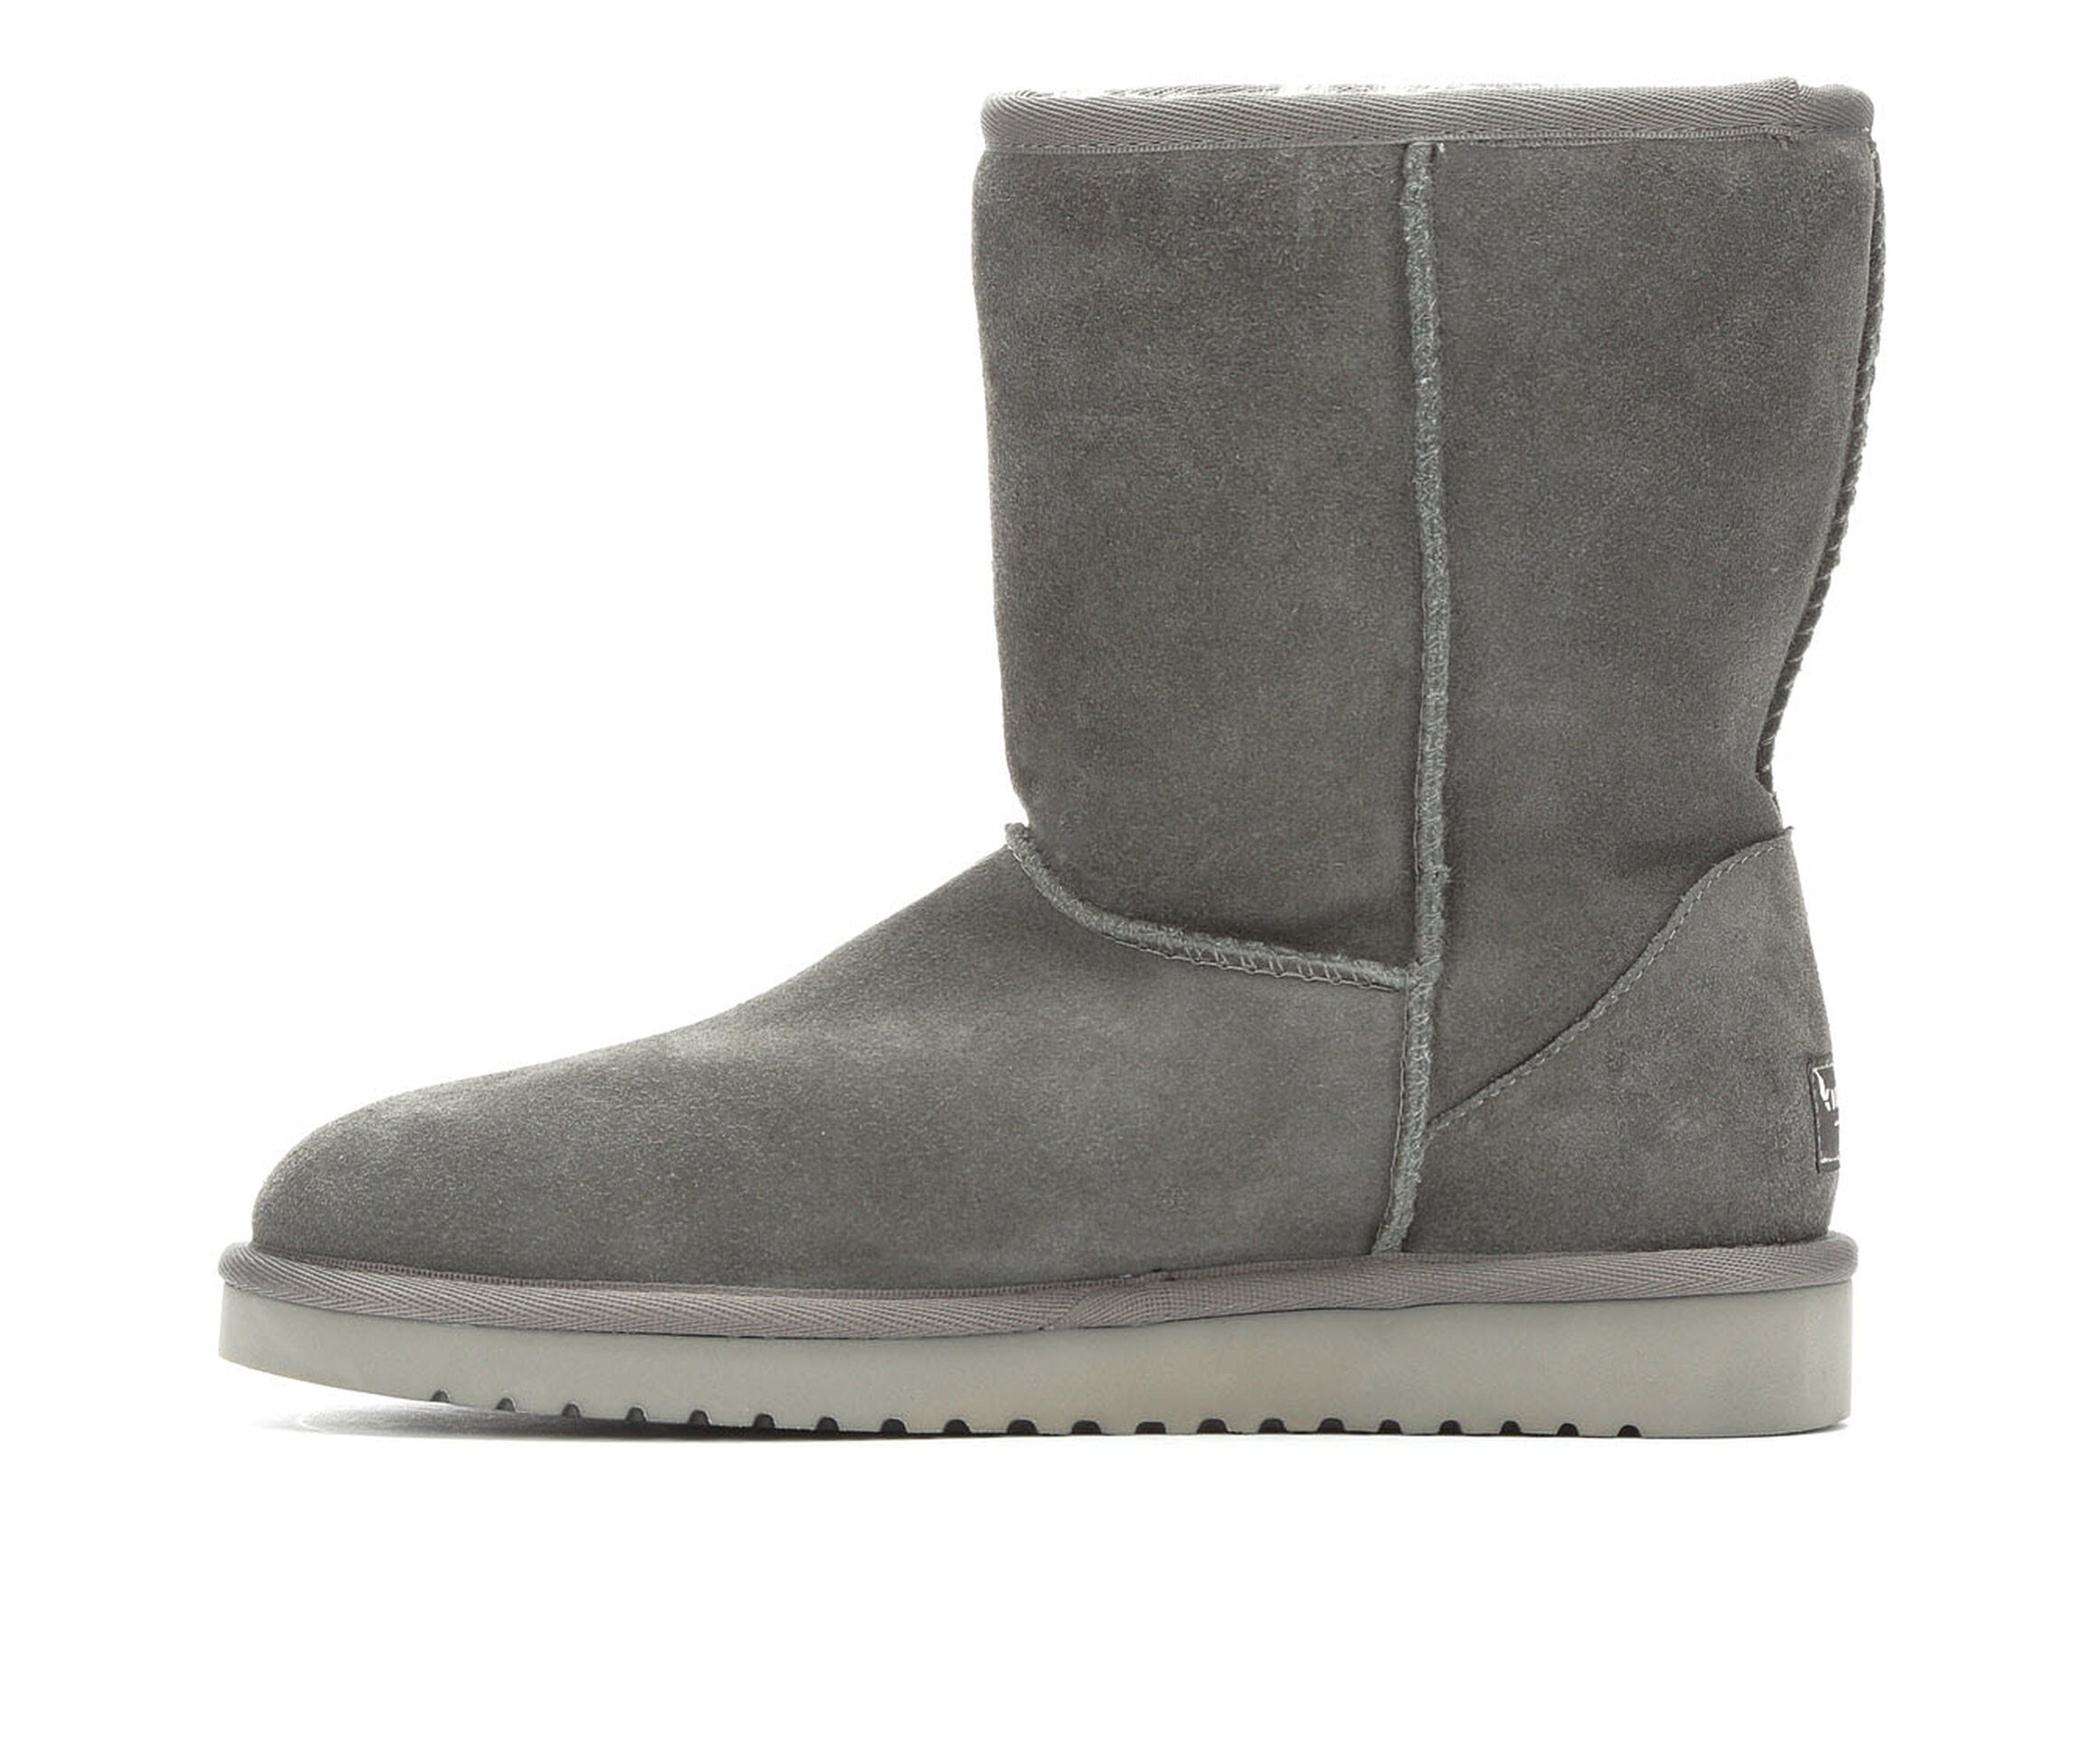 Women's Koolaburra by UGG Shoes and Boots | Shoe Carnival